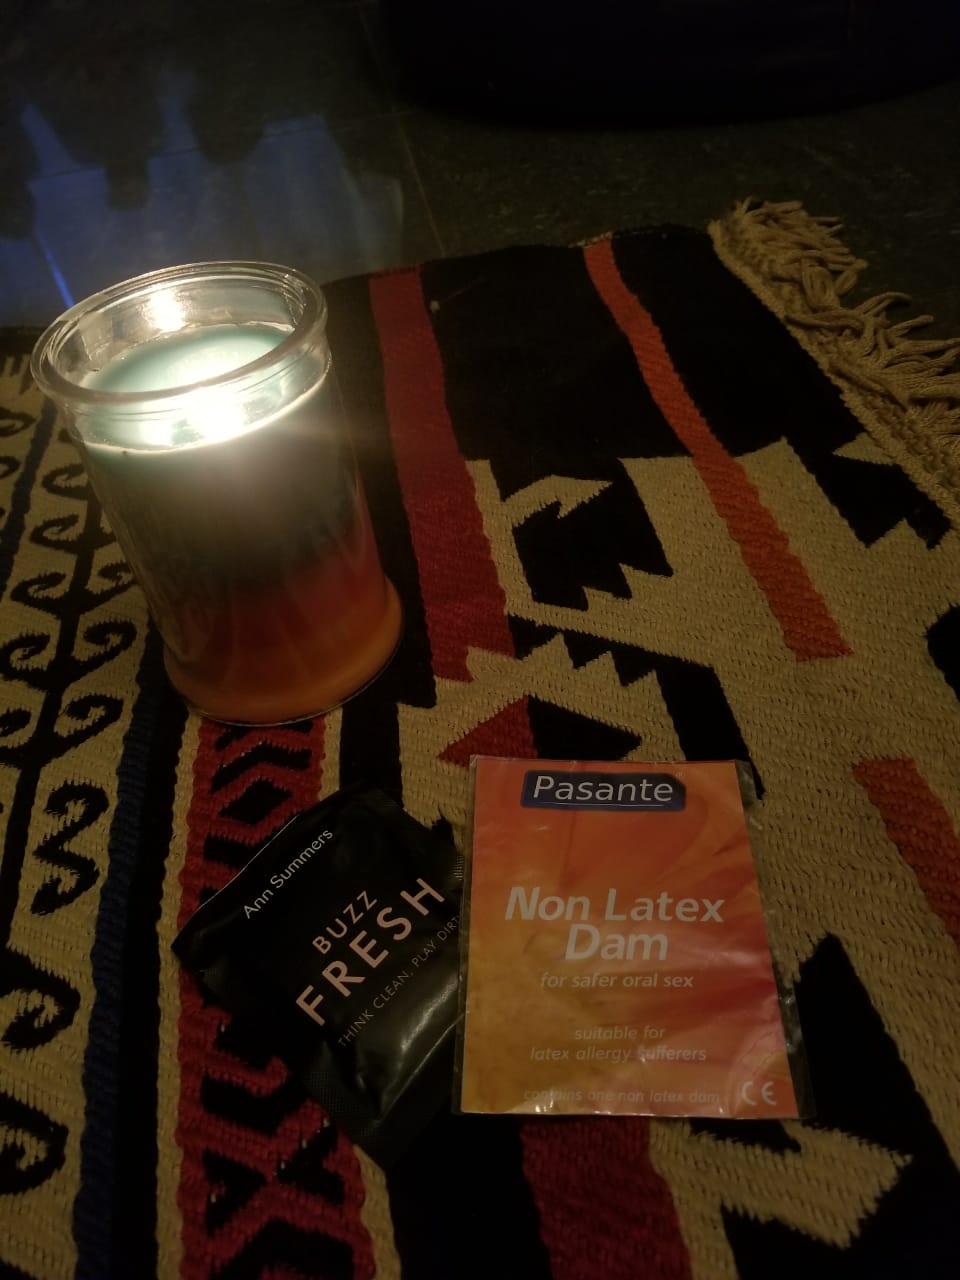 Candles, condoms and dental dam contraceptives